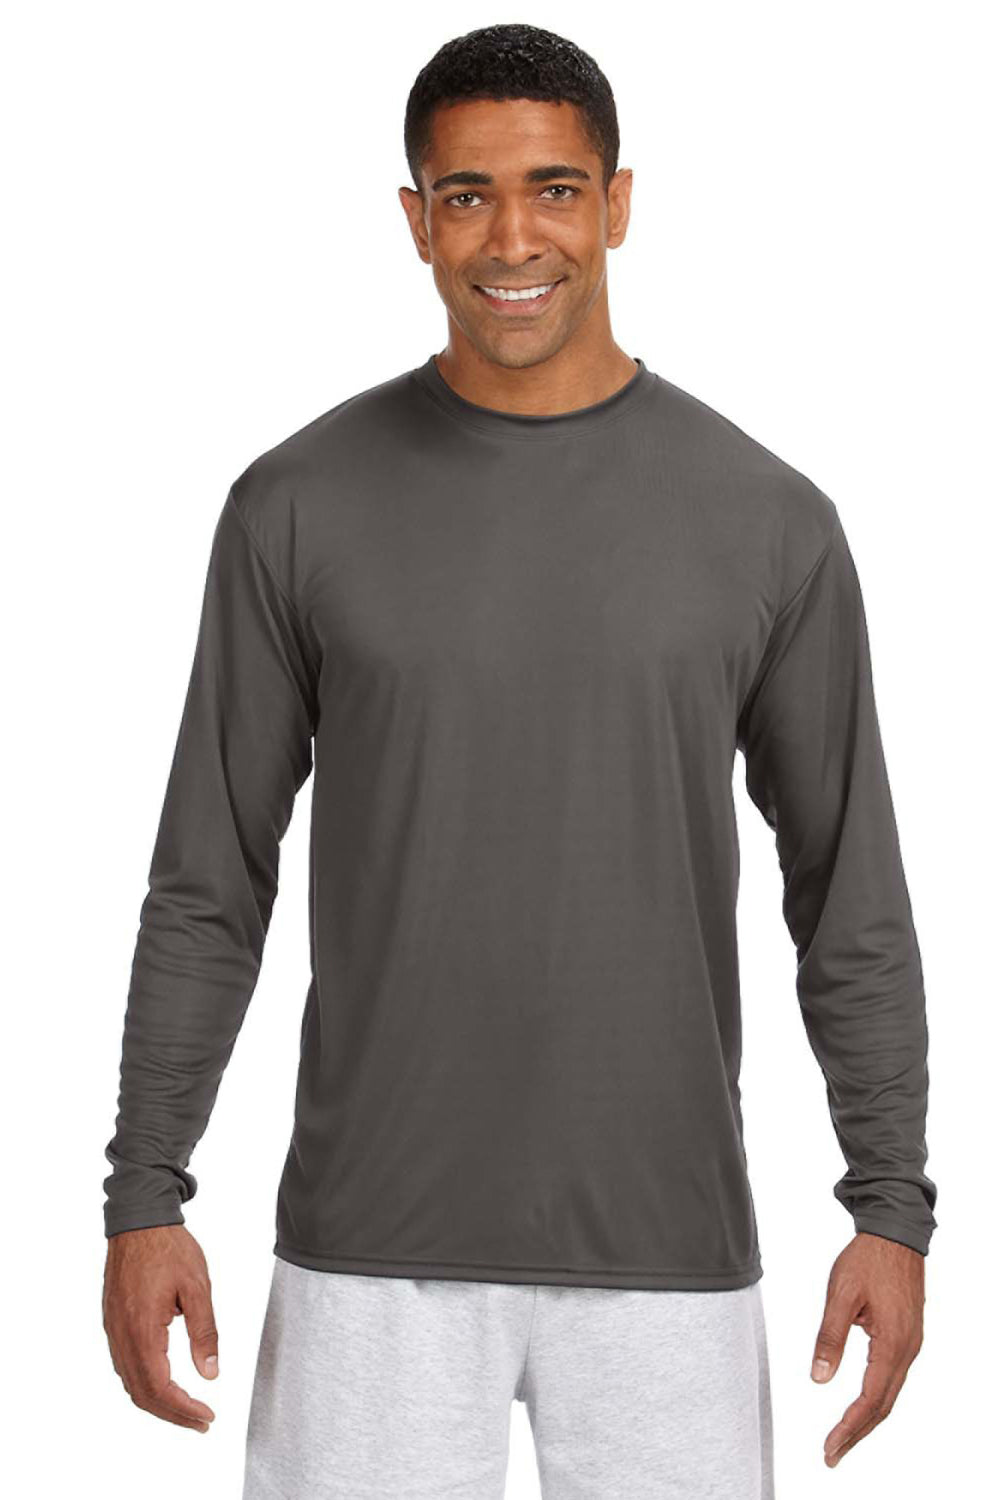 A4 N3165 Mens Performance Moisture Wicking Long Sleeve Crewneck T-Shirt Graphite Grey Model Front